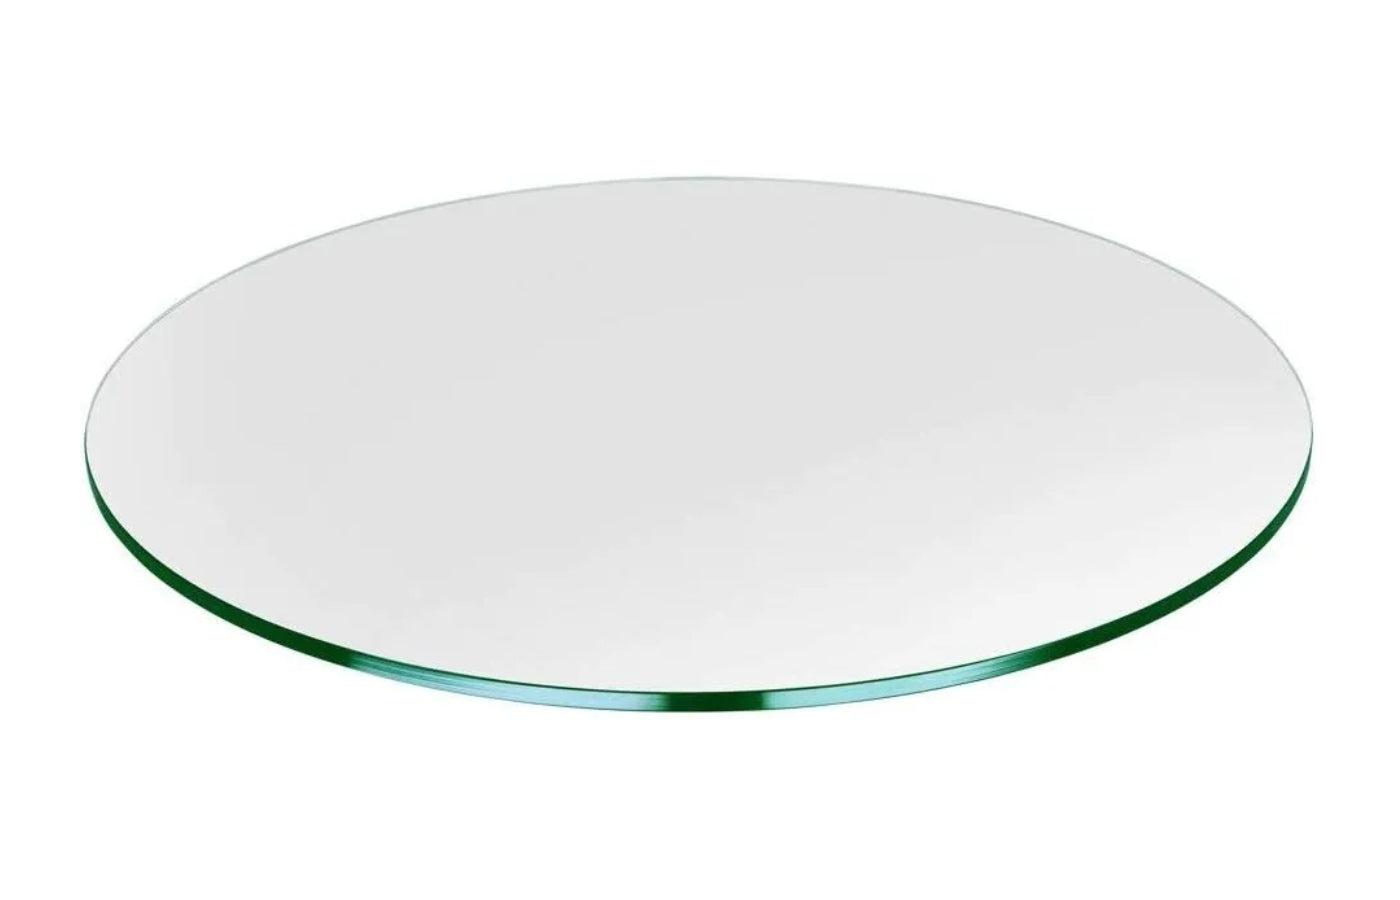 WIsdomFur 30" Round Tempered Glass Shelf Panel Table Top Clear